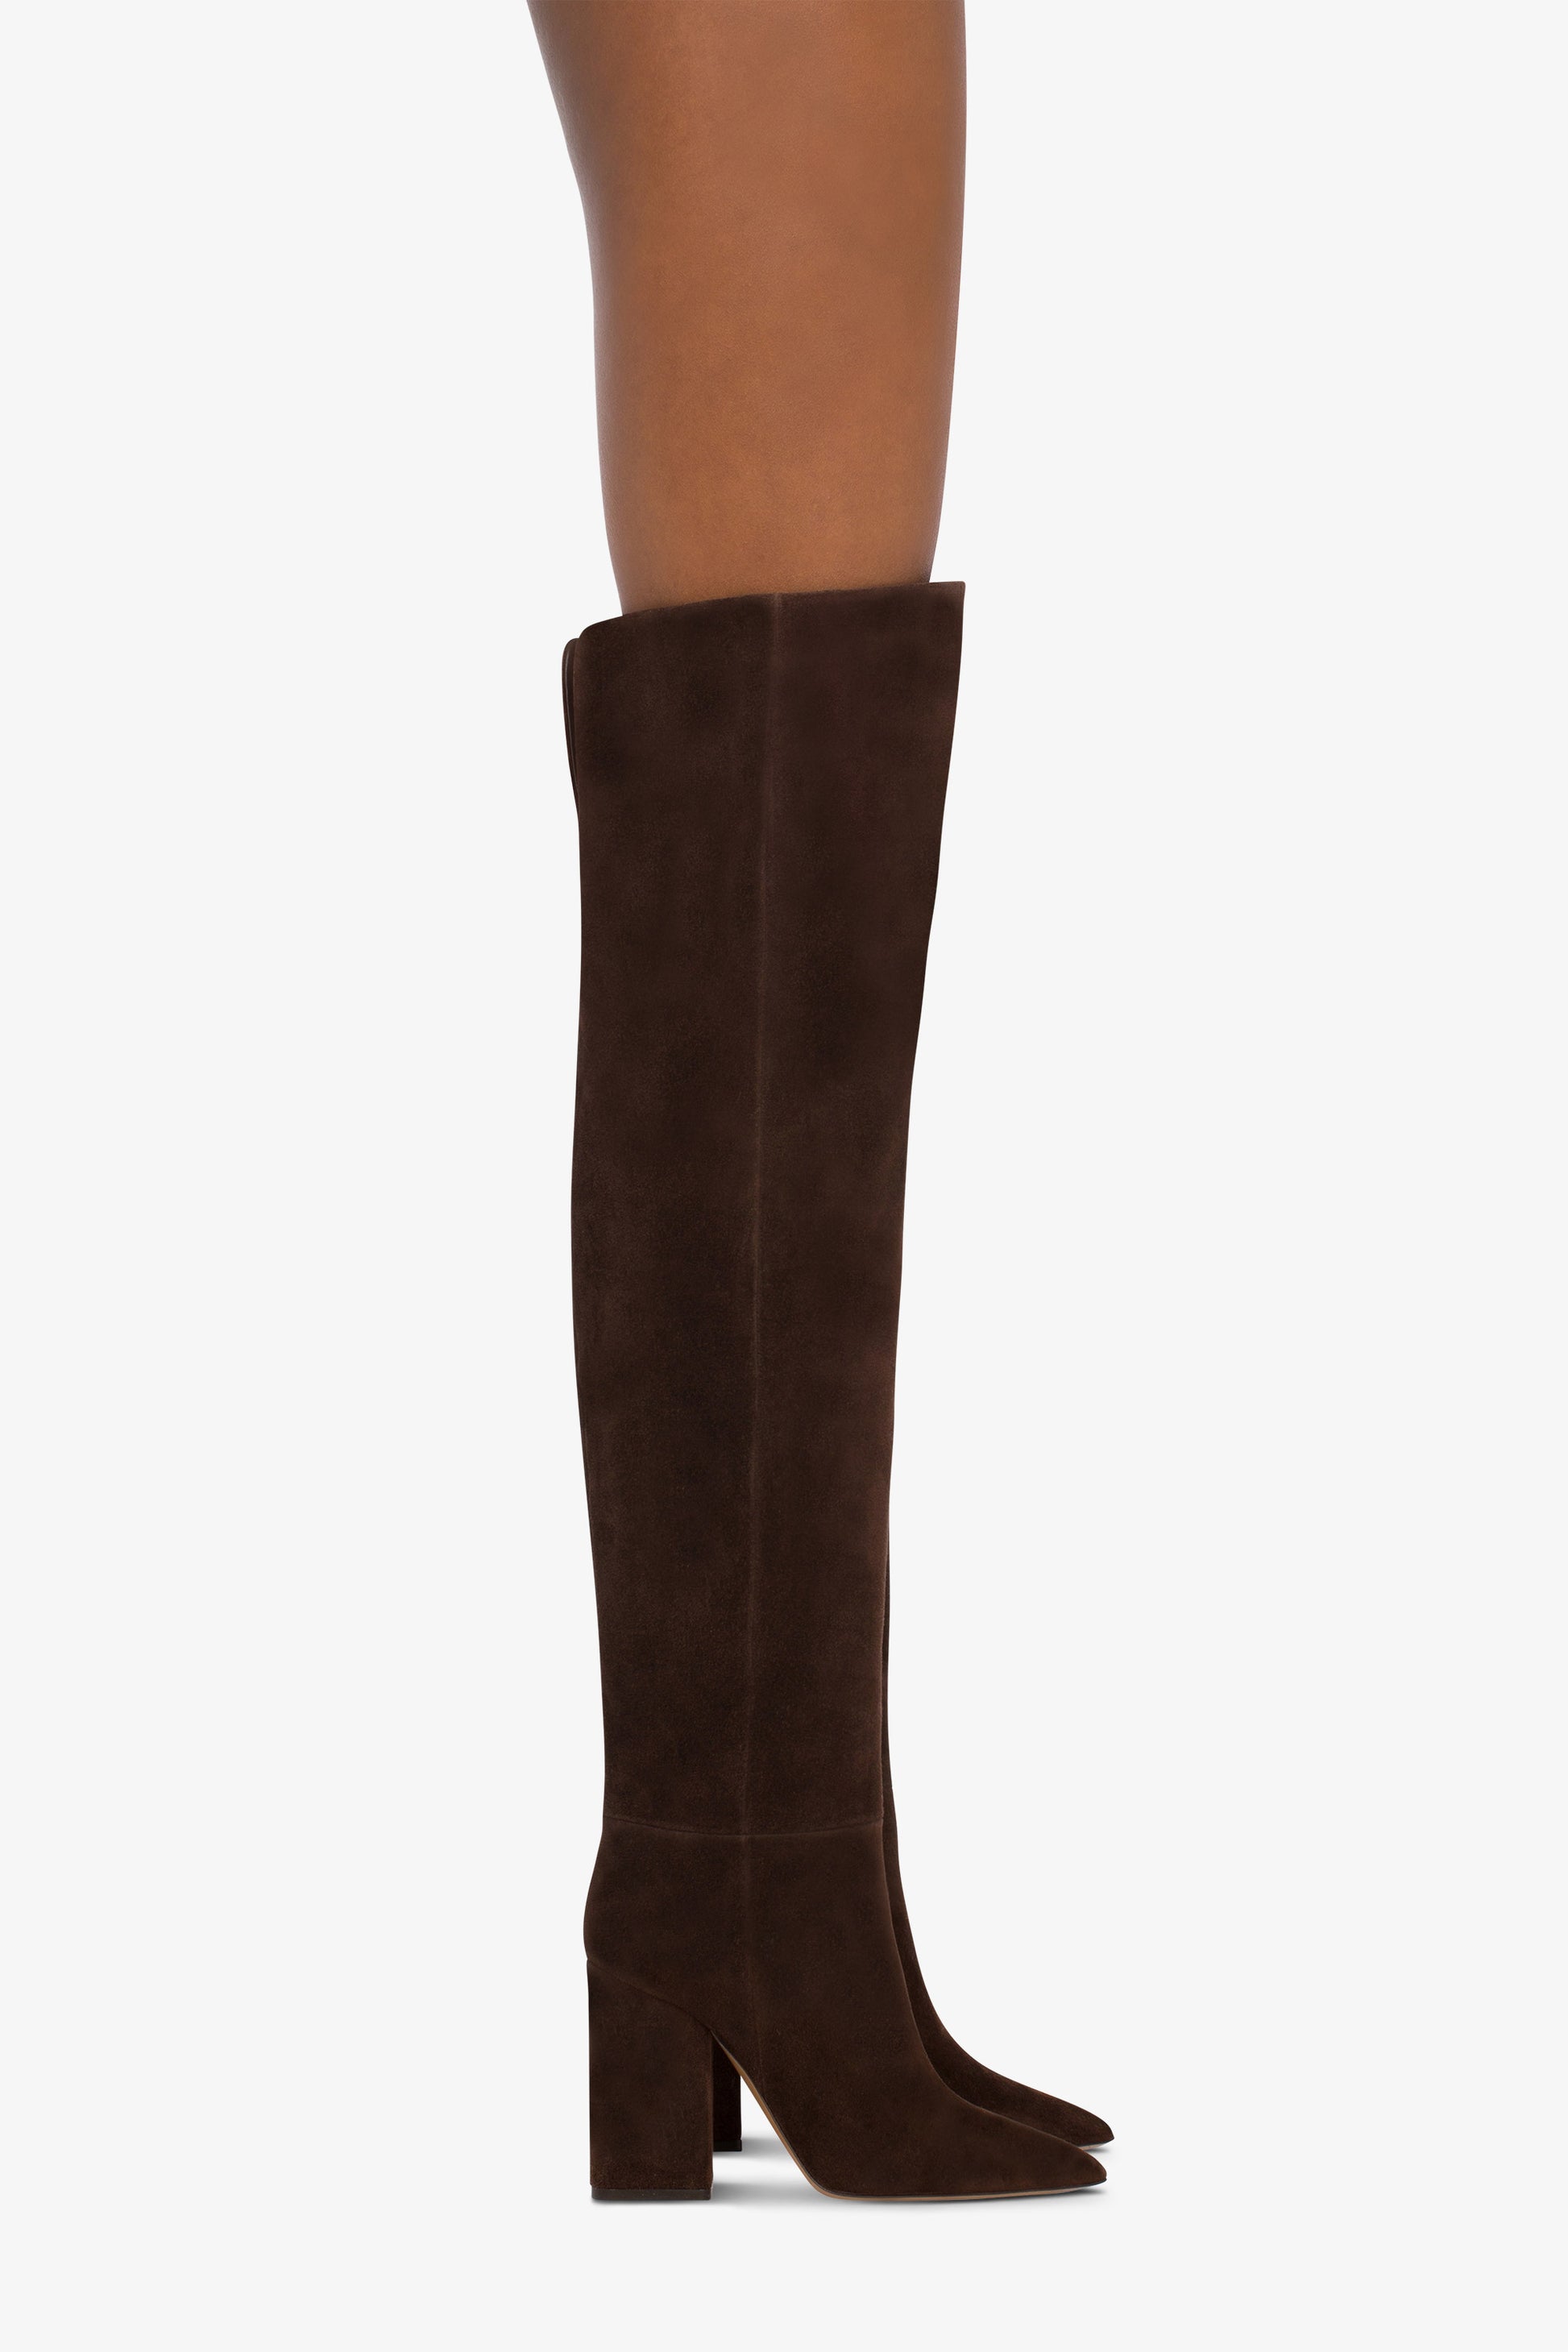 Over-the-knee, long pointed boots in soft pepper suede leather - Produit porté